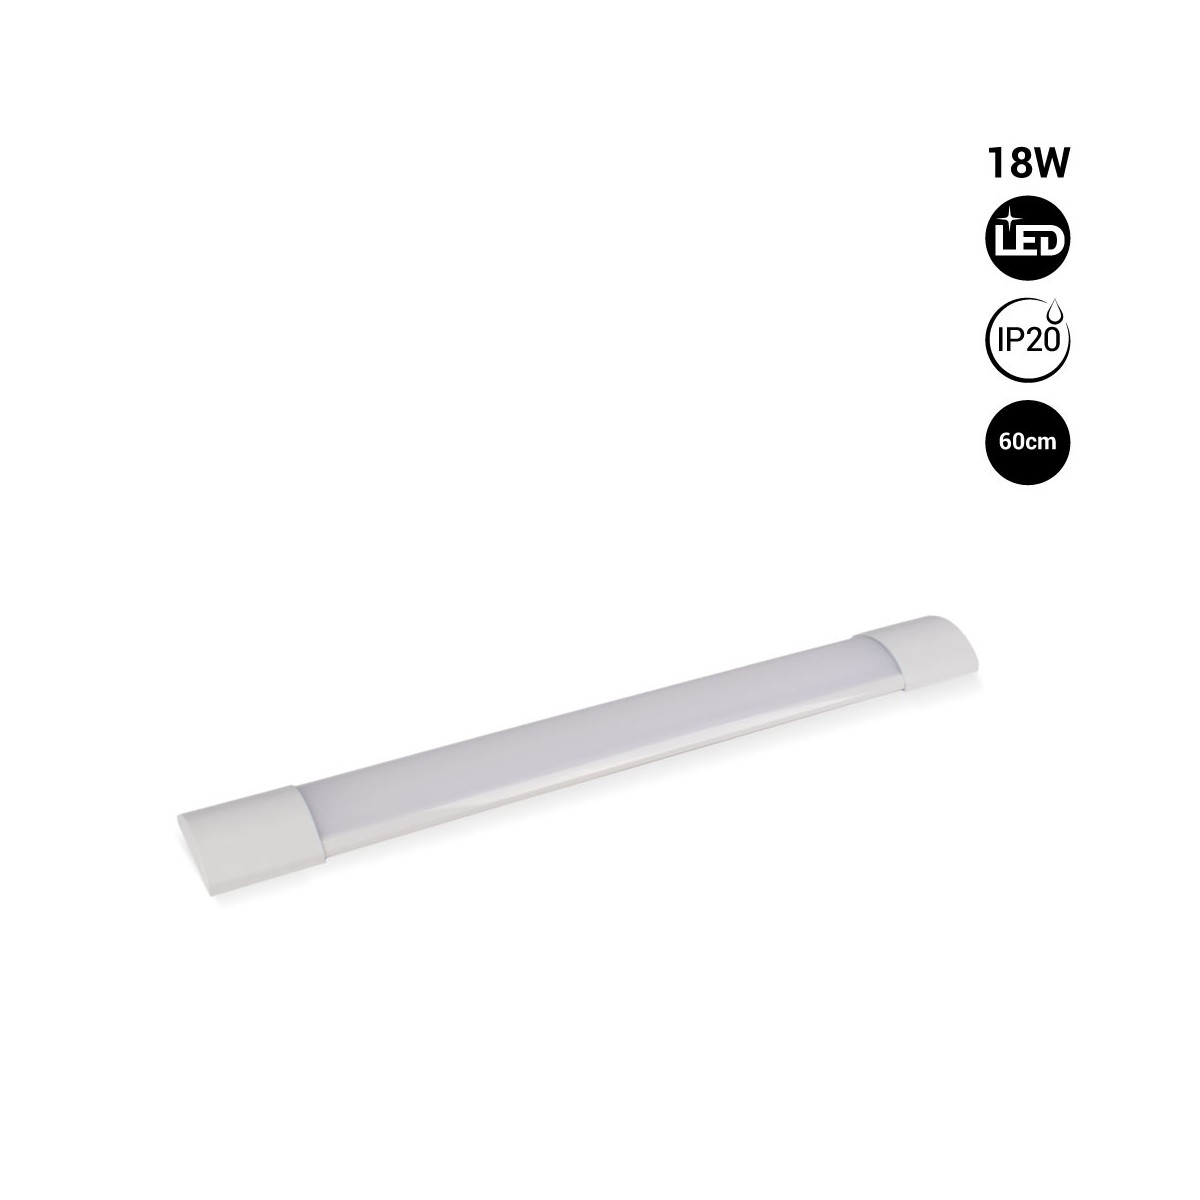 Linear LED surface mounted luminaire - 18W - 60cm - IP20